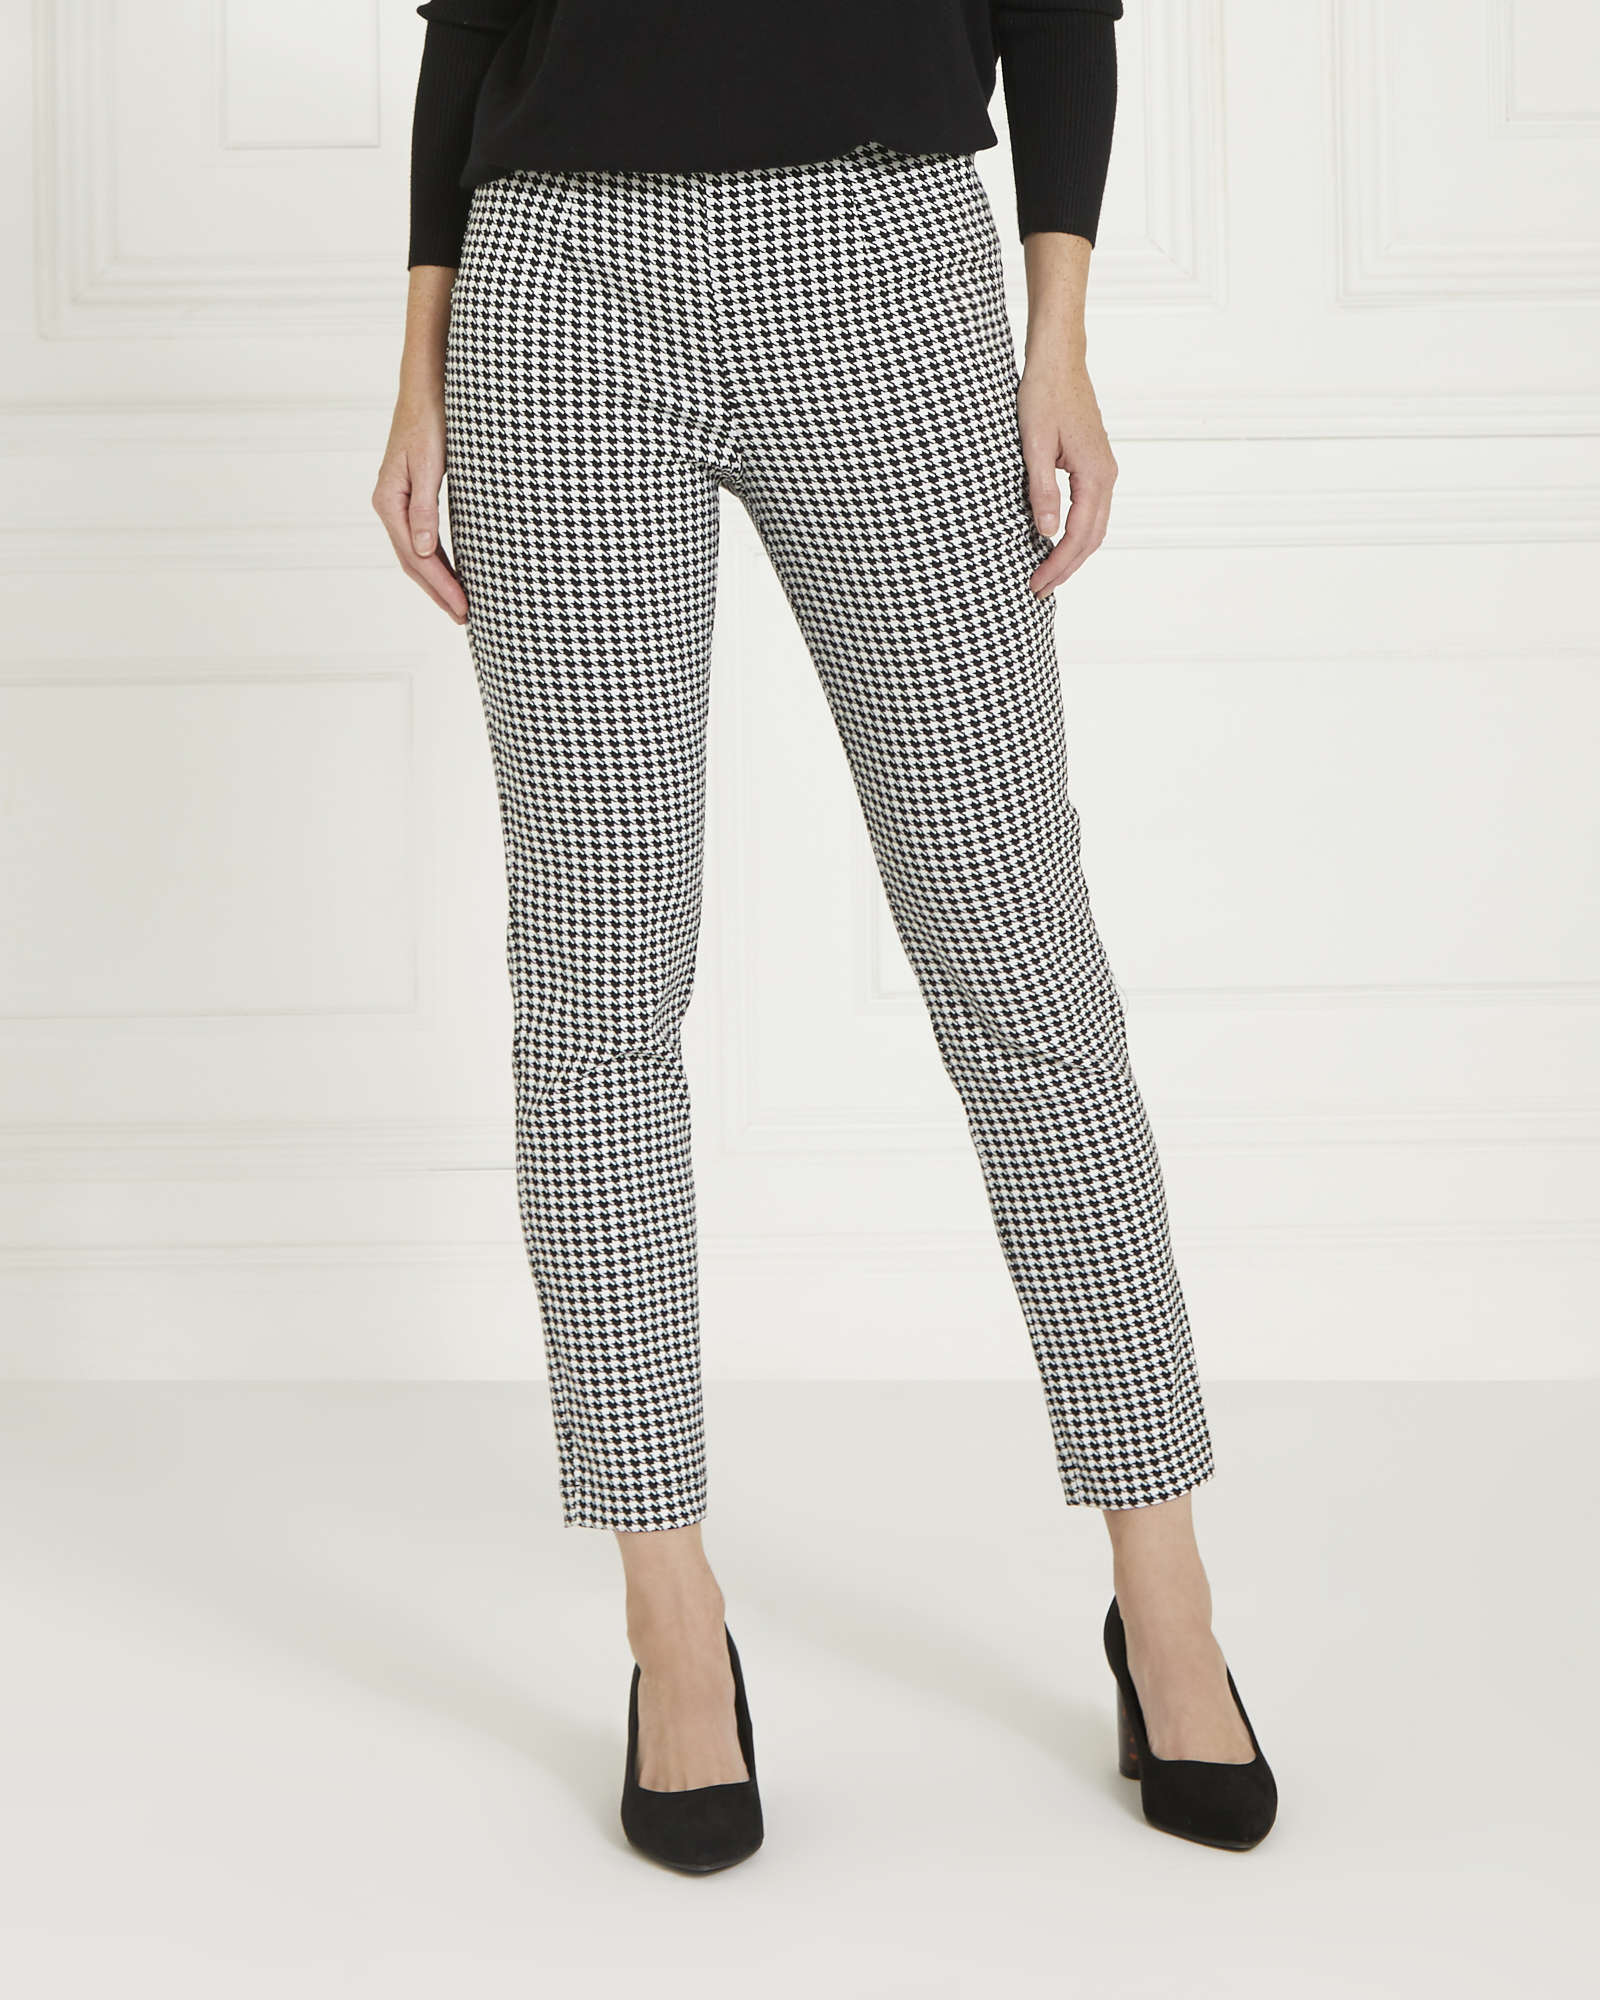 Midrise tapered jacquard trousers  Pants  Ladies Clothing at Scotch   Soda